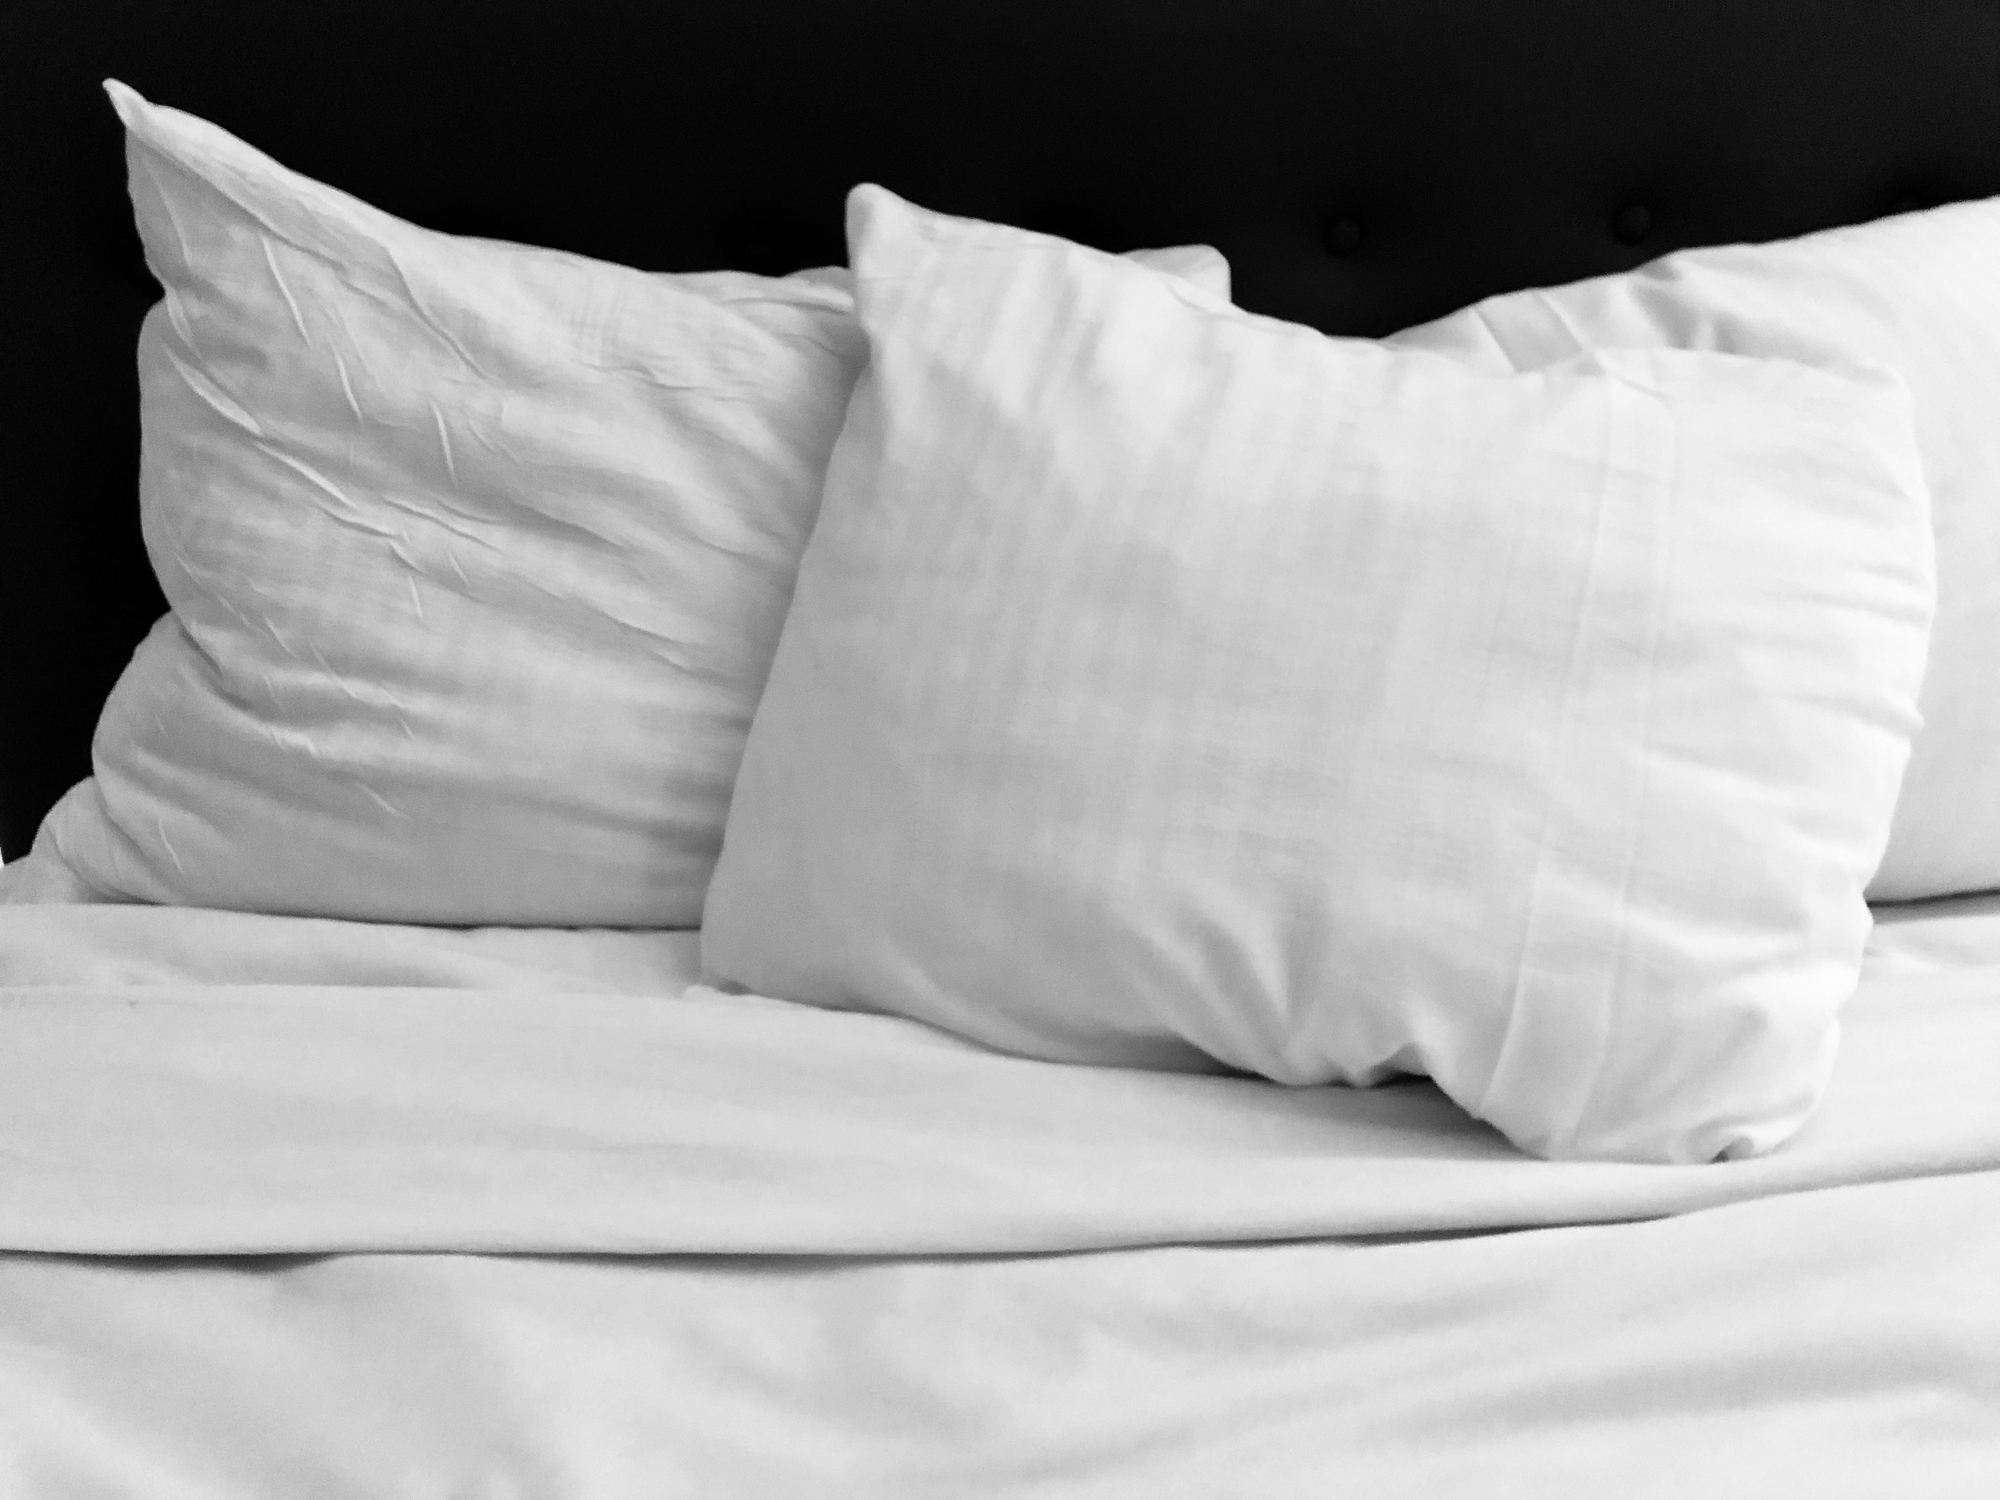 A set of white pillows on a bed with white sheets, in front of a black wall